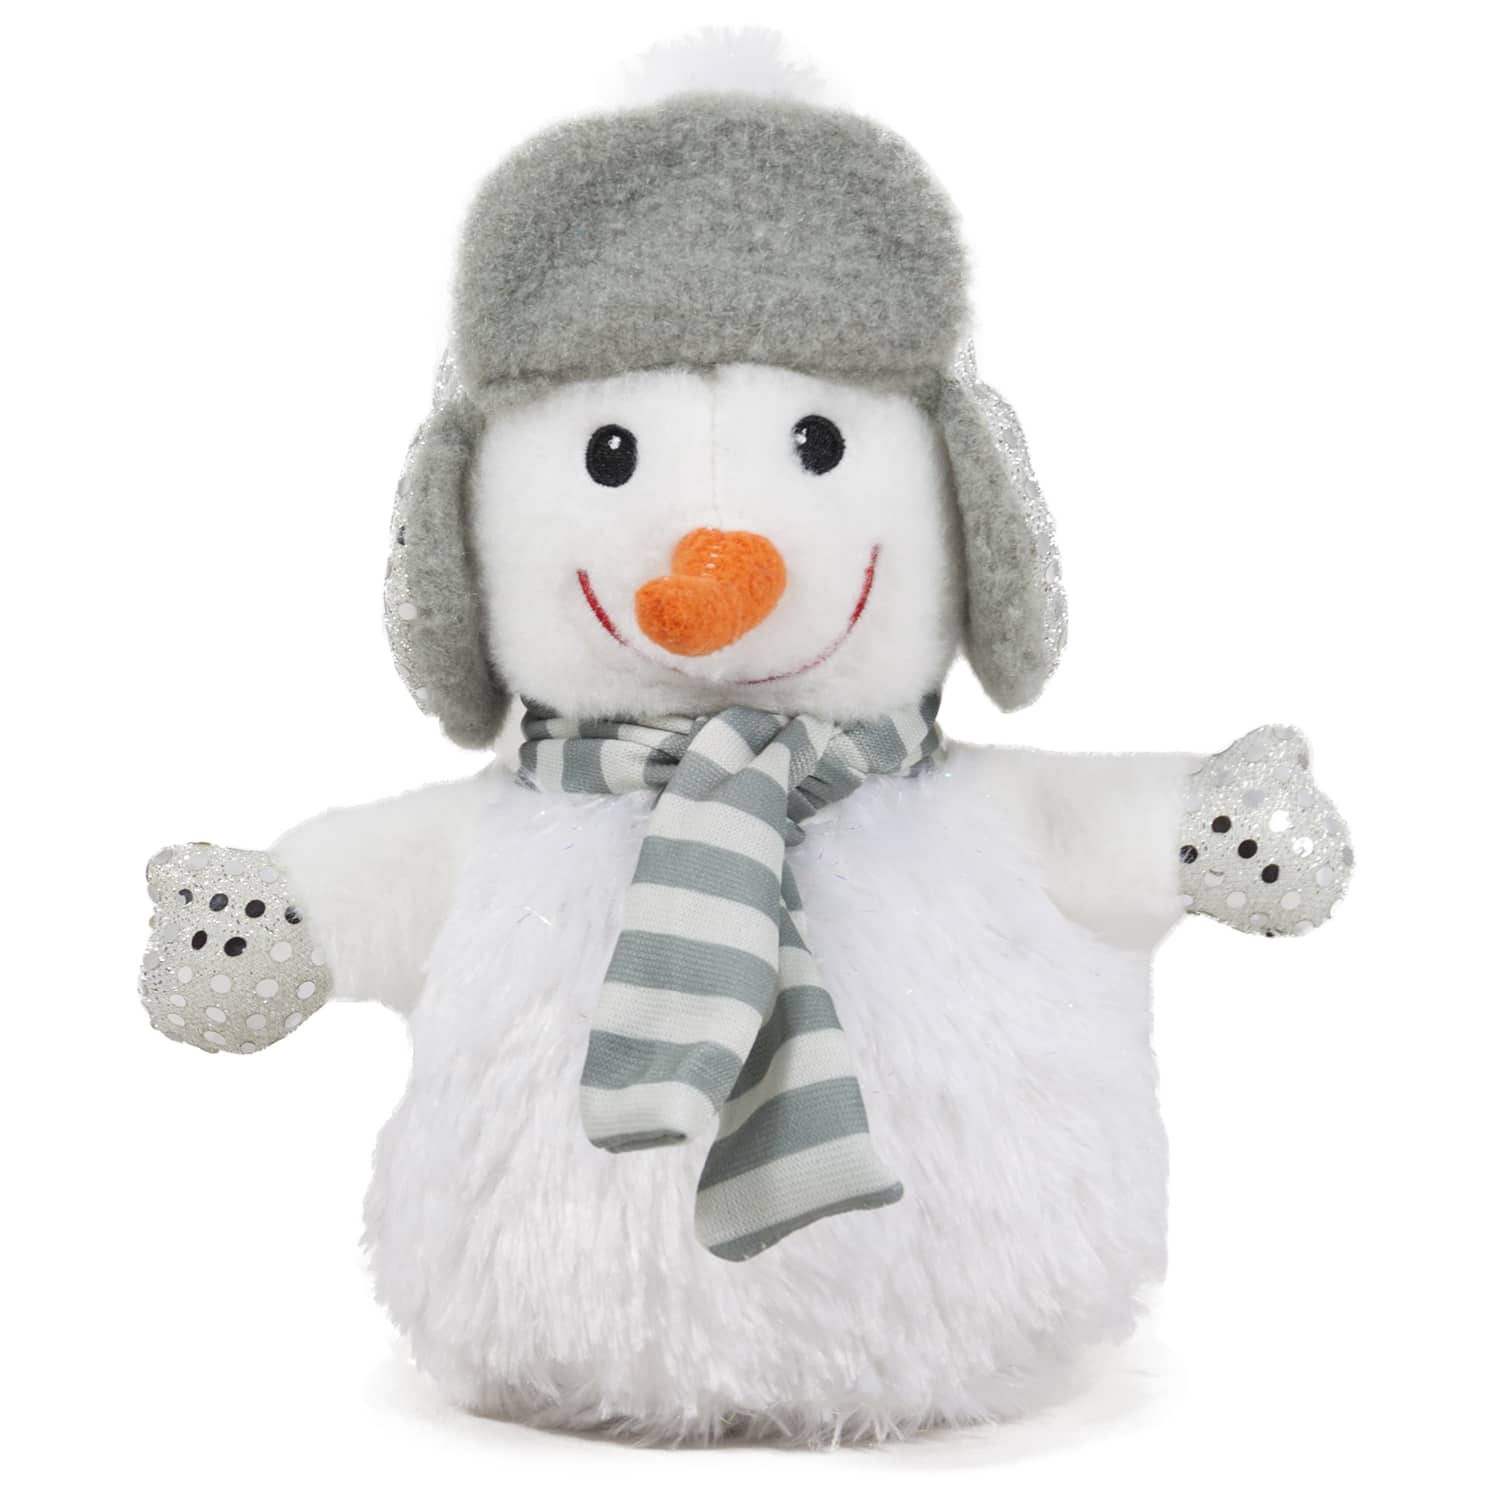 Snowman with hat and scarf - Grey